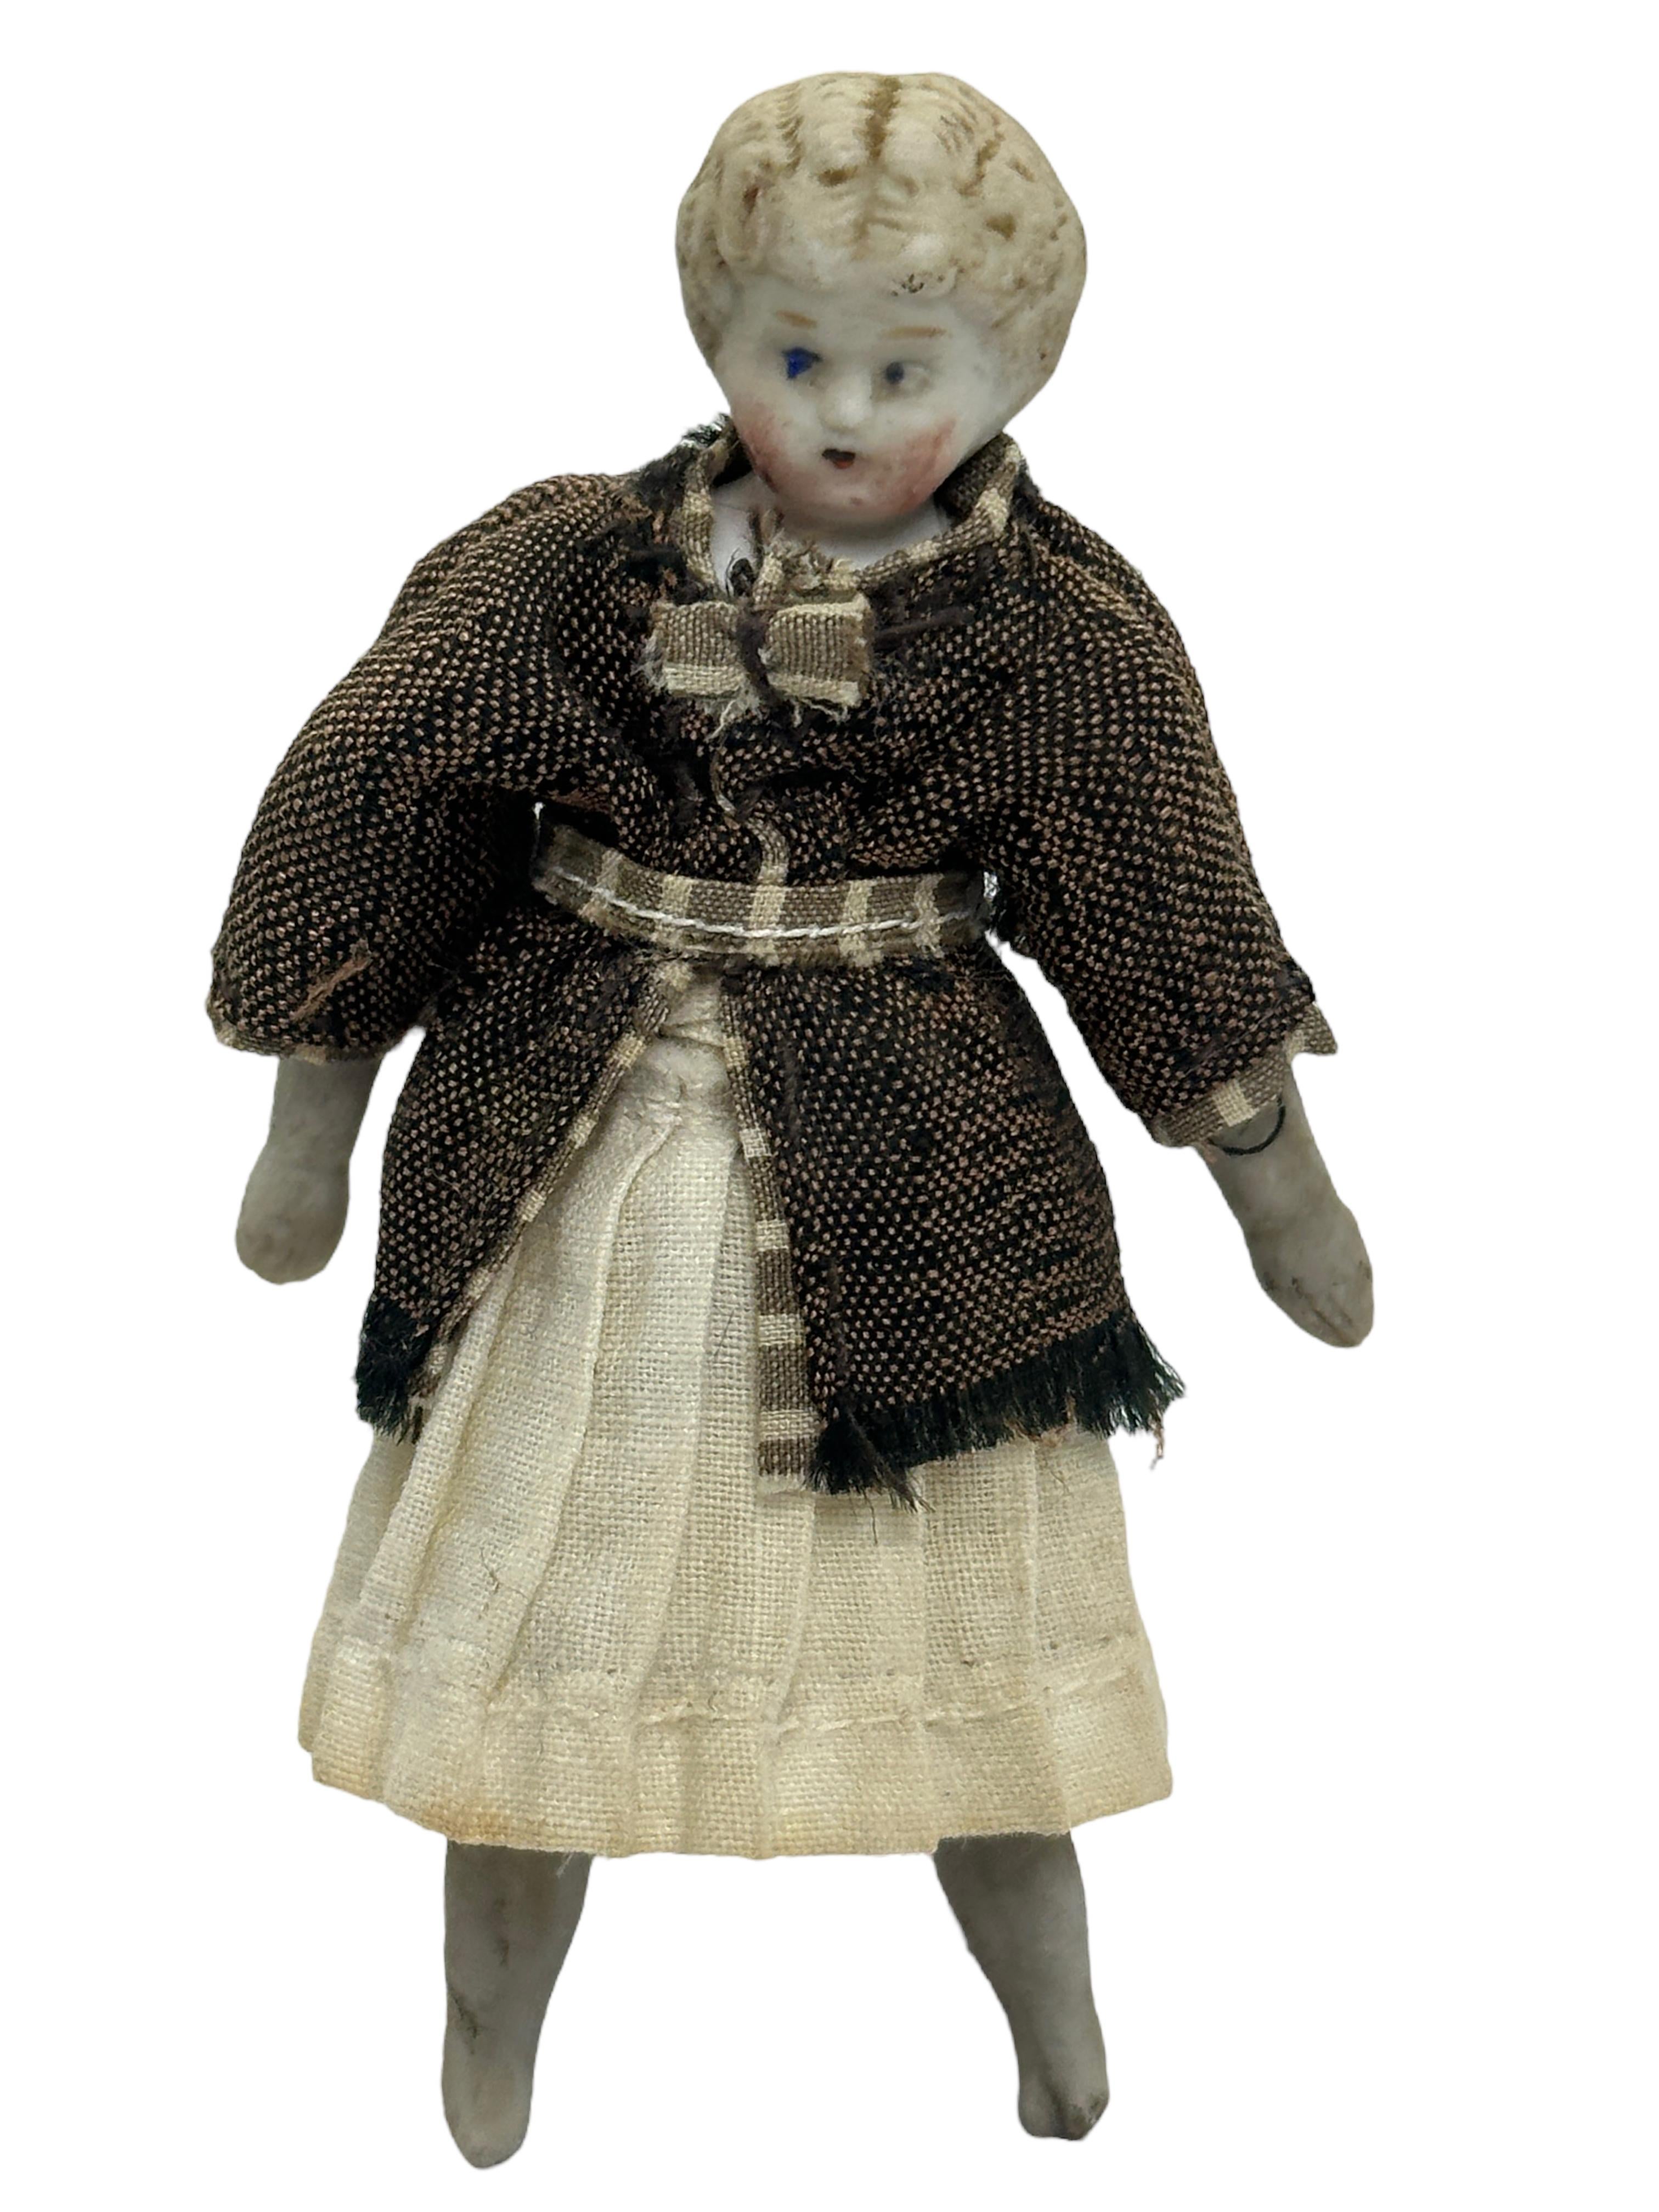 This rare and exquisite miniature antique German Bisque Head, Arms and Leg Doll is a must-have for Dollhouse and Doll collectors and enthusiasts alike. With its beautiful Outfit, it is suitable for any room and adds a touch of elegance to your